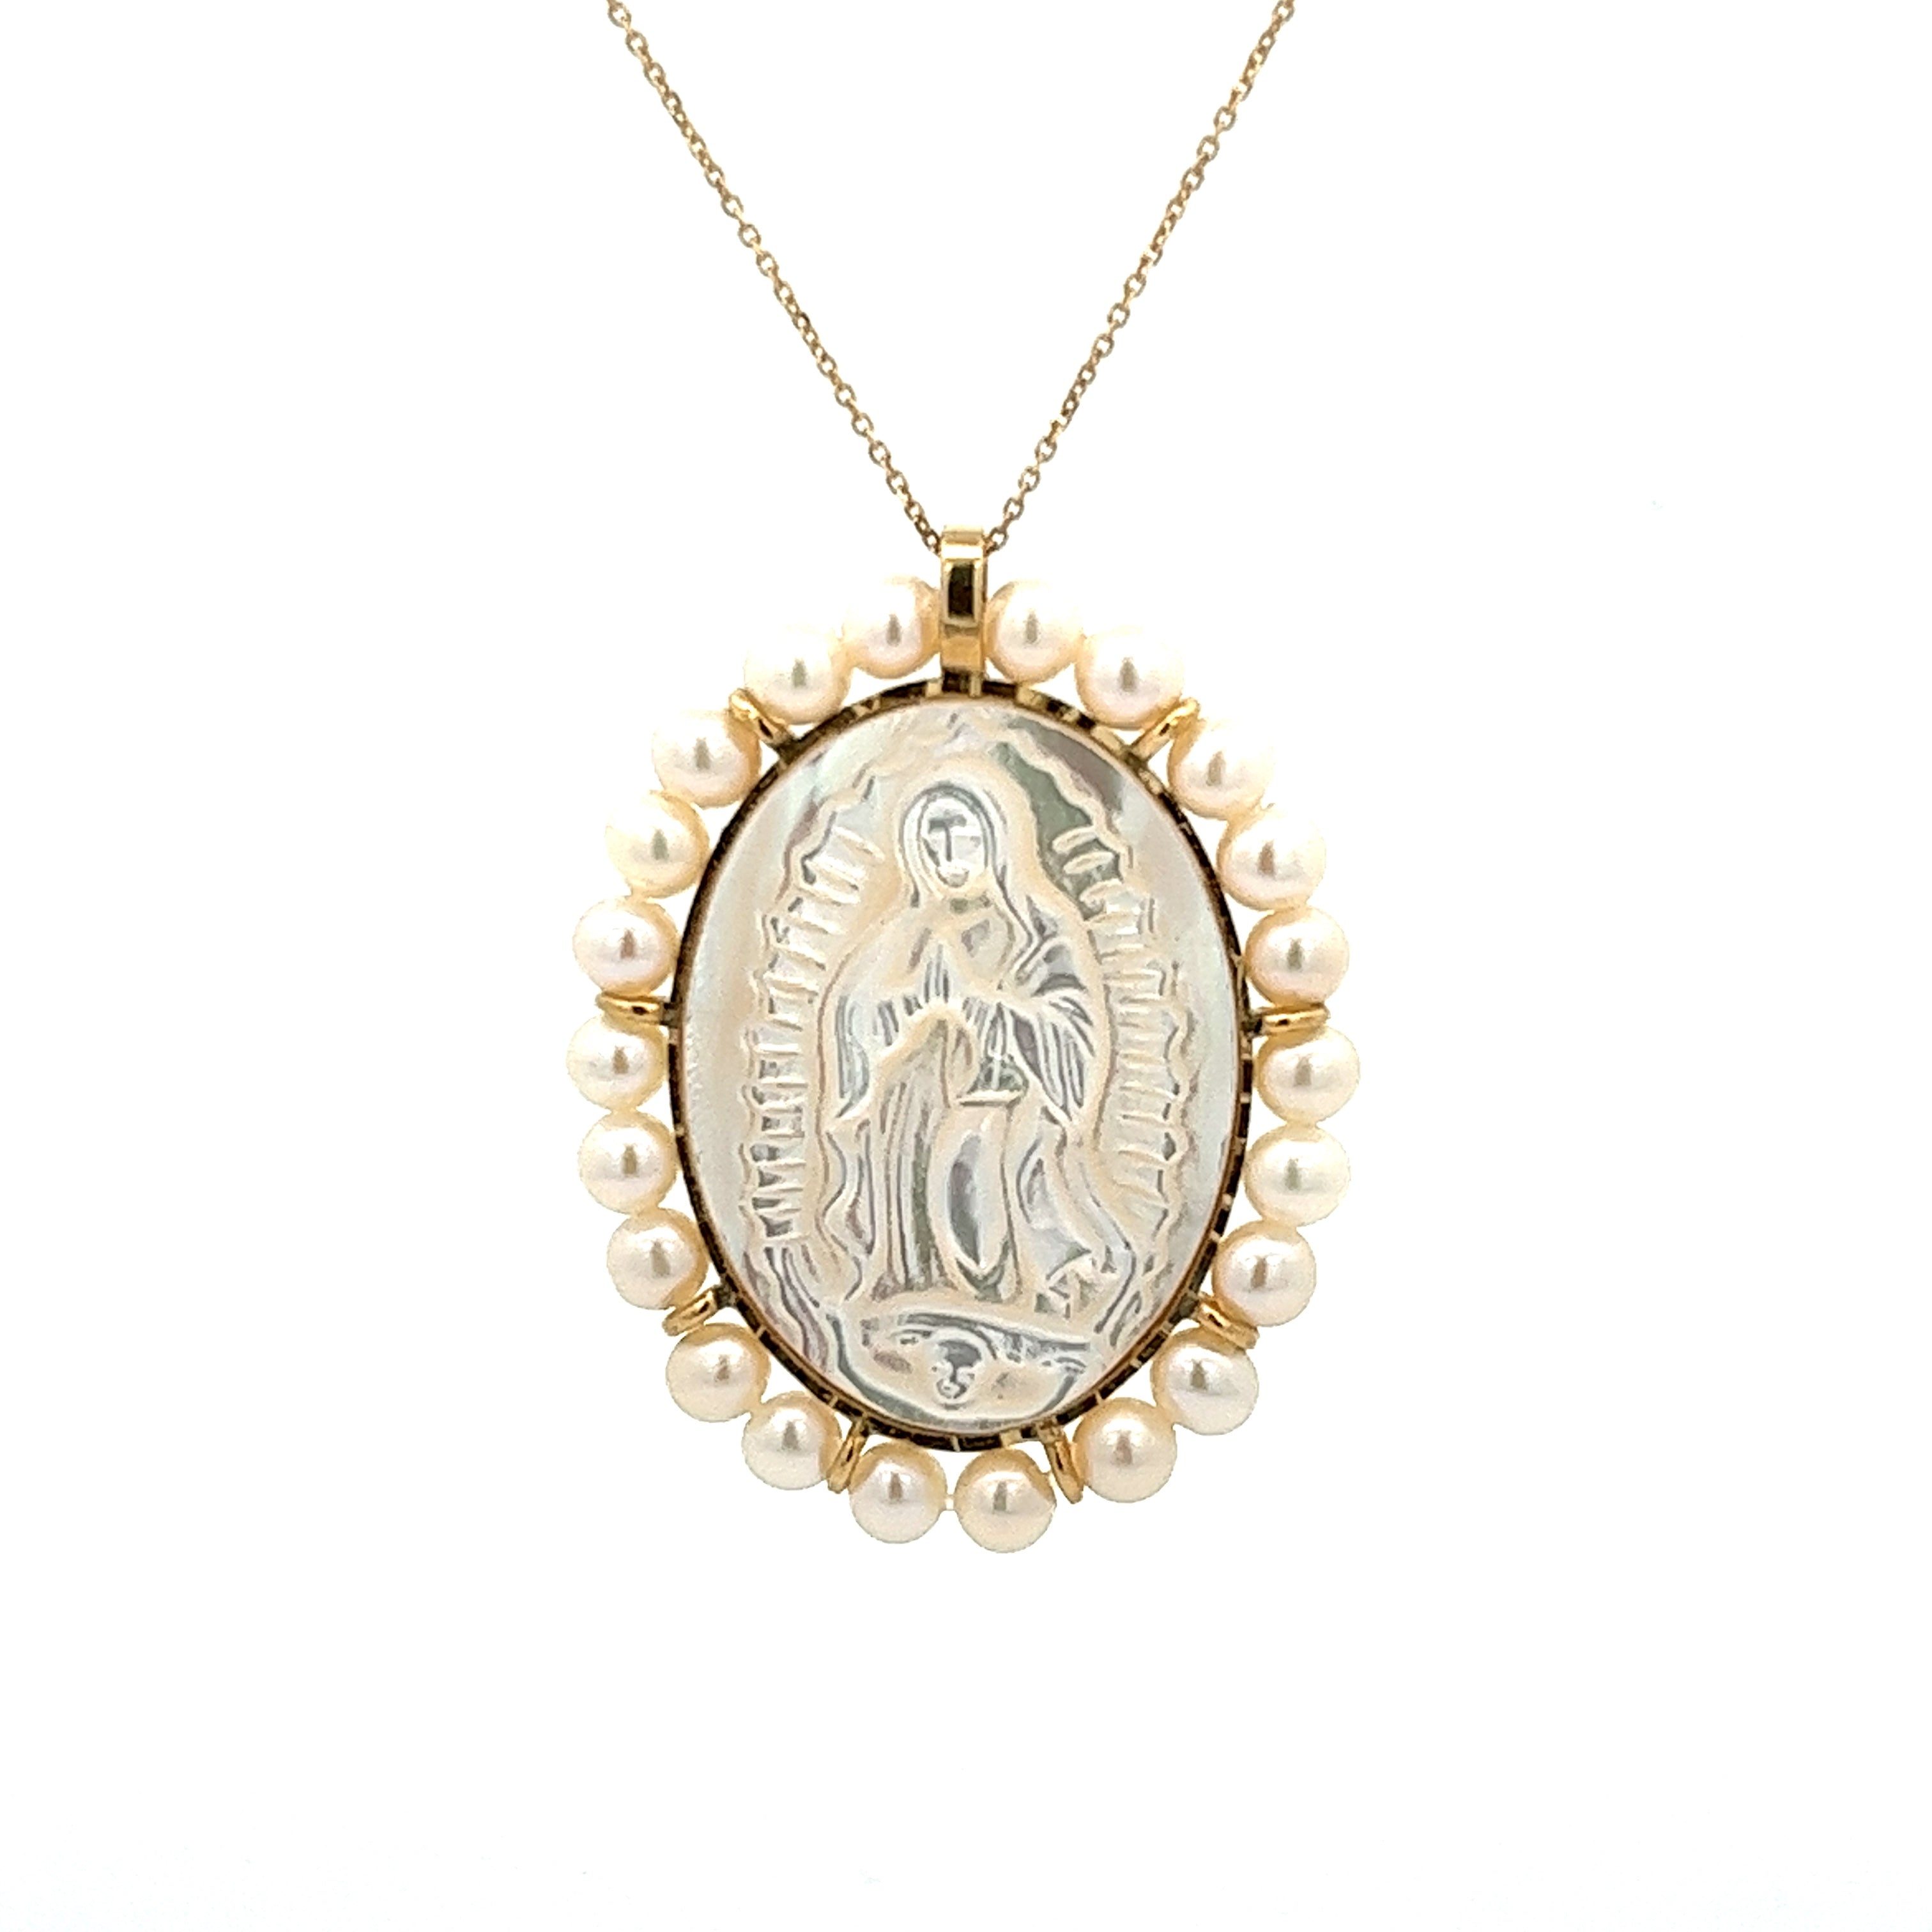 14K GOLD LADY OF GUADALUPE MEDAL IN MOTHER OF PEARL WITH HALO OF PEARLS